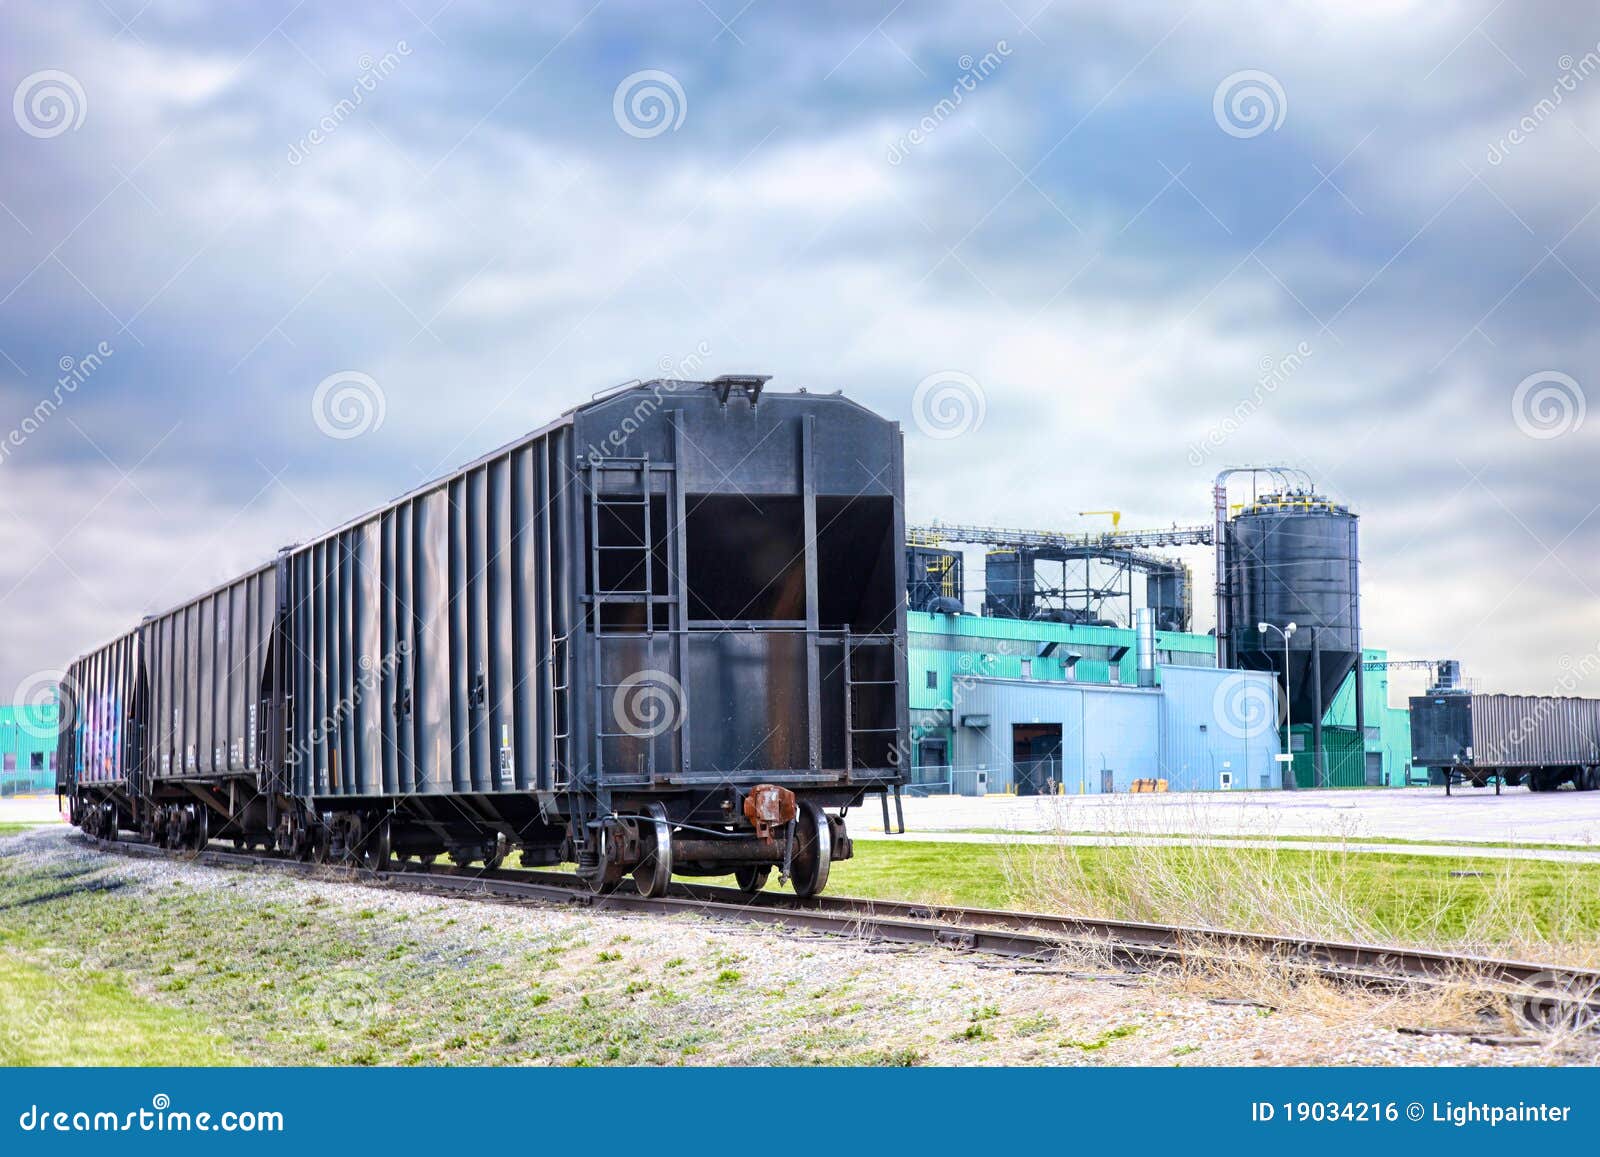 freight train industrial plant